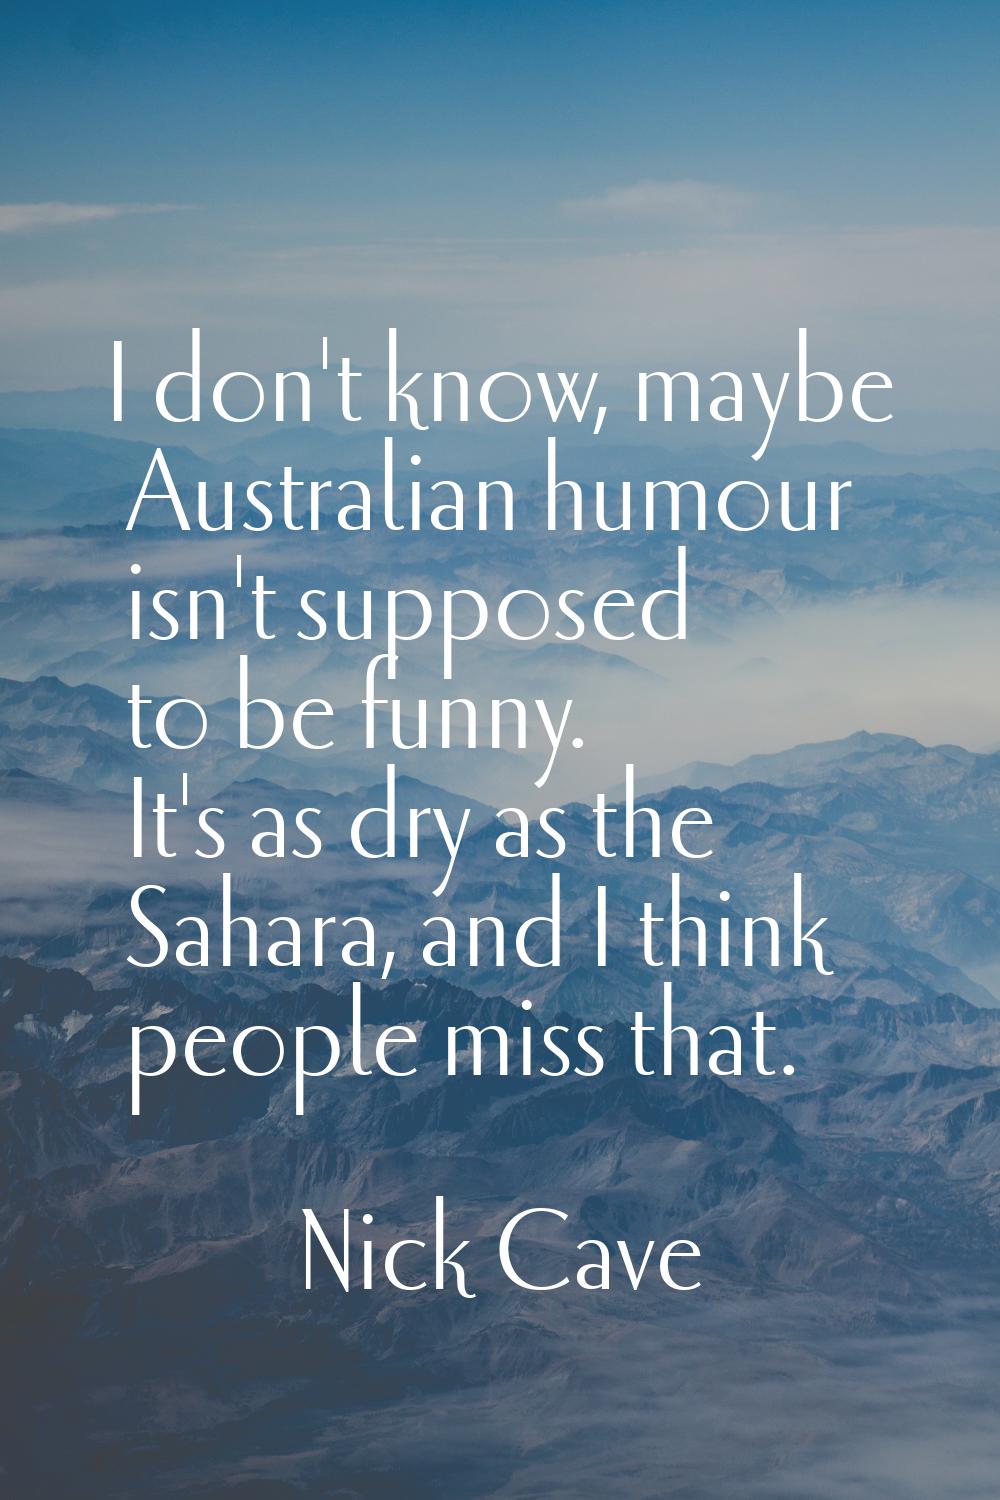 I don't know, maybe Australian humour isn't supposed to be funny. It's as dry as the Sahara, and I 